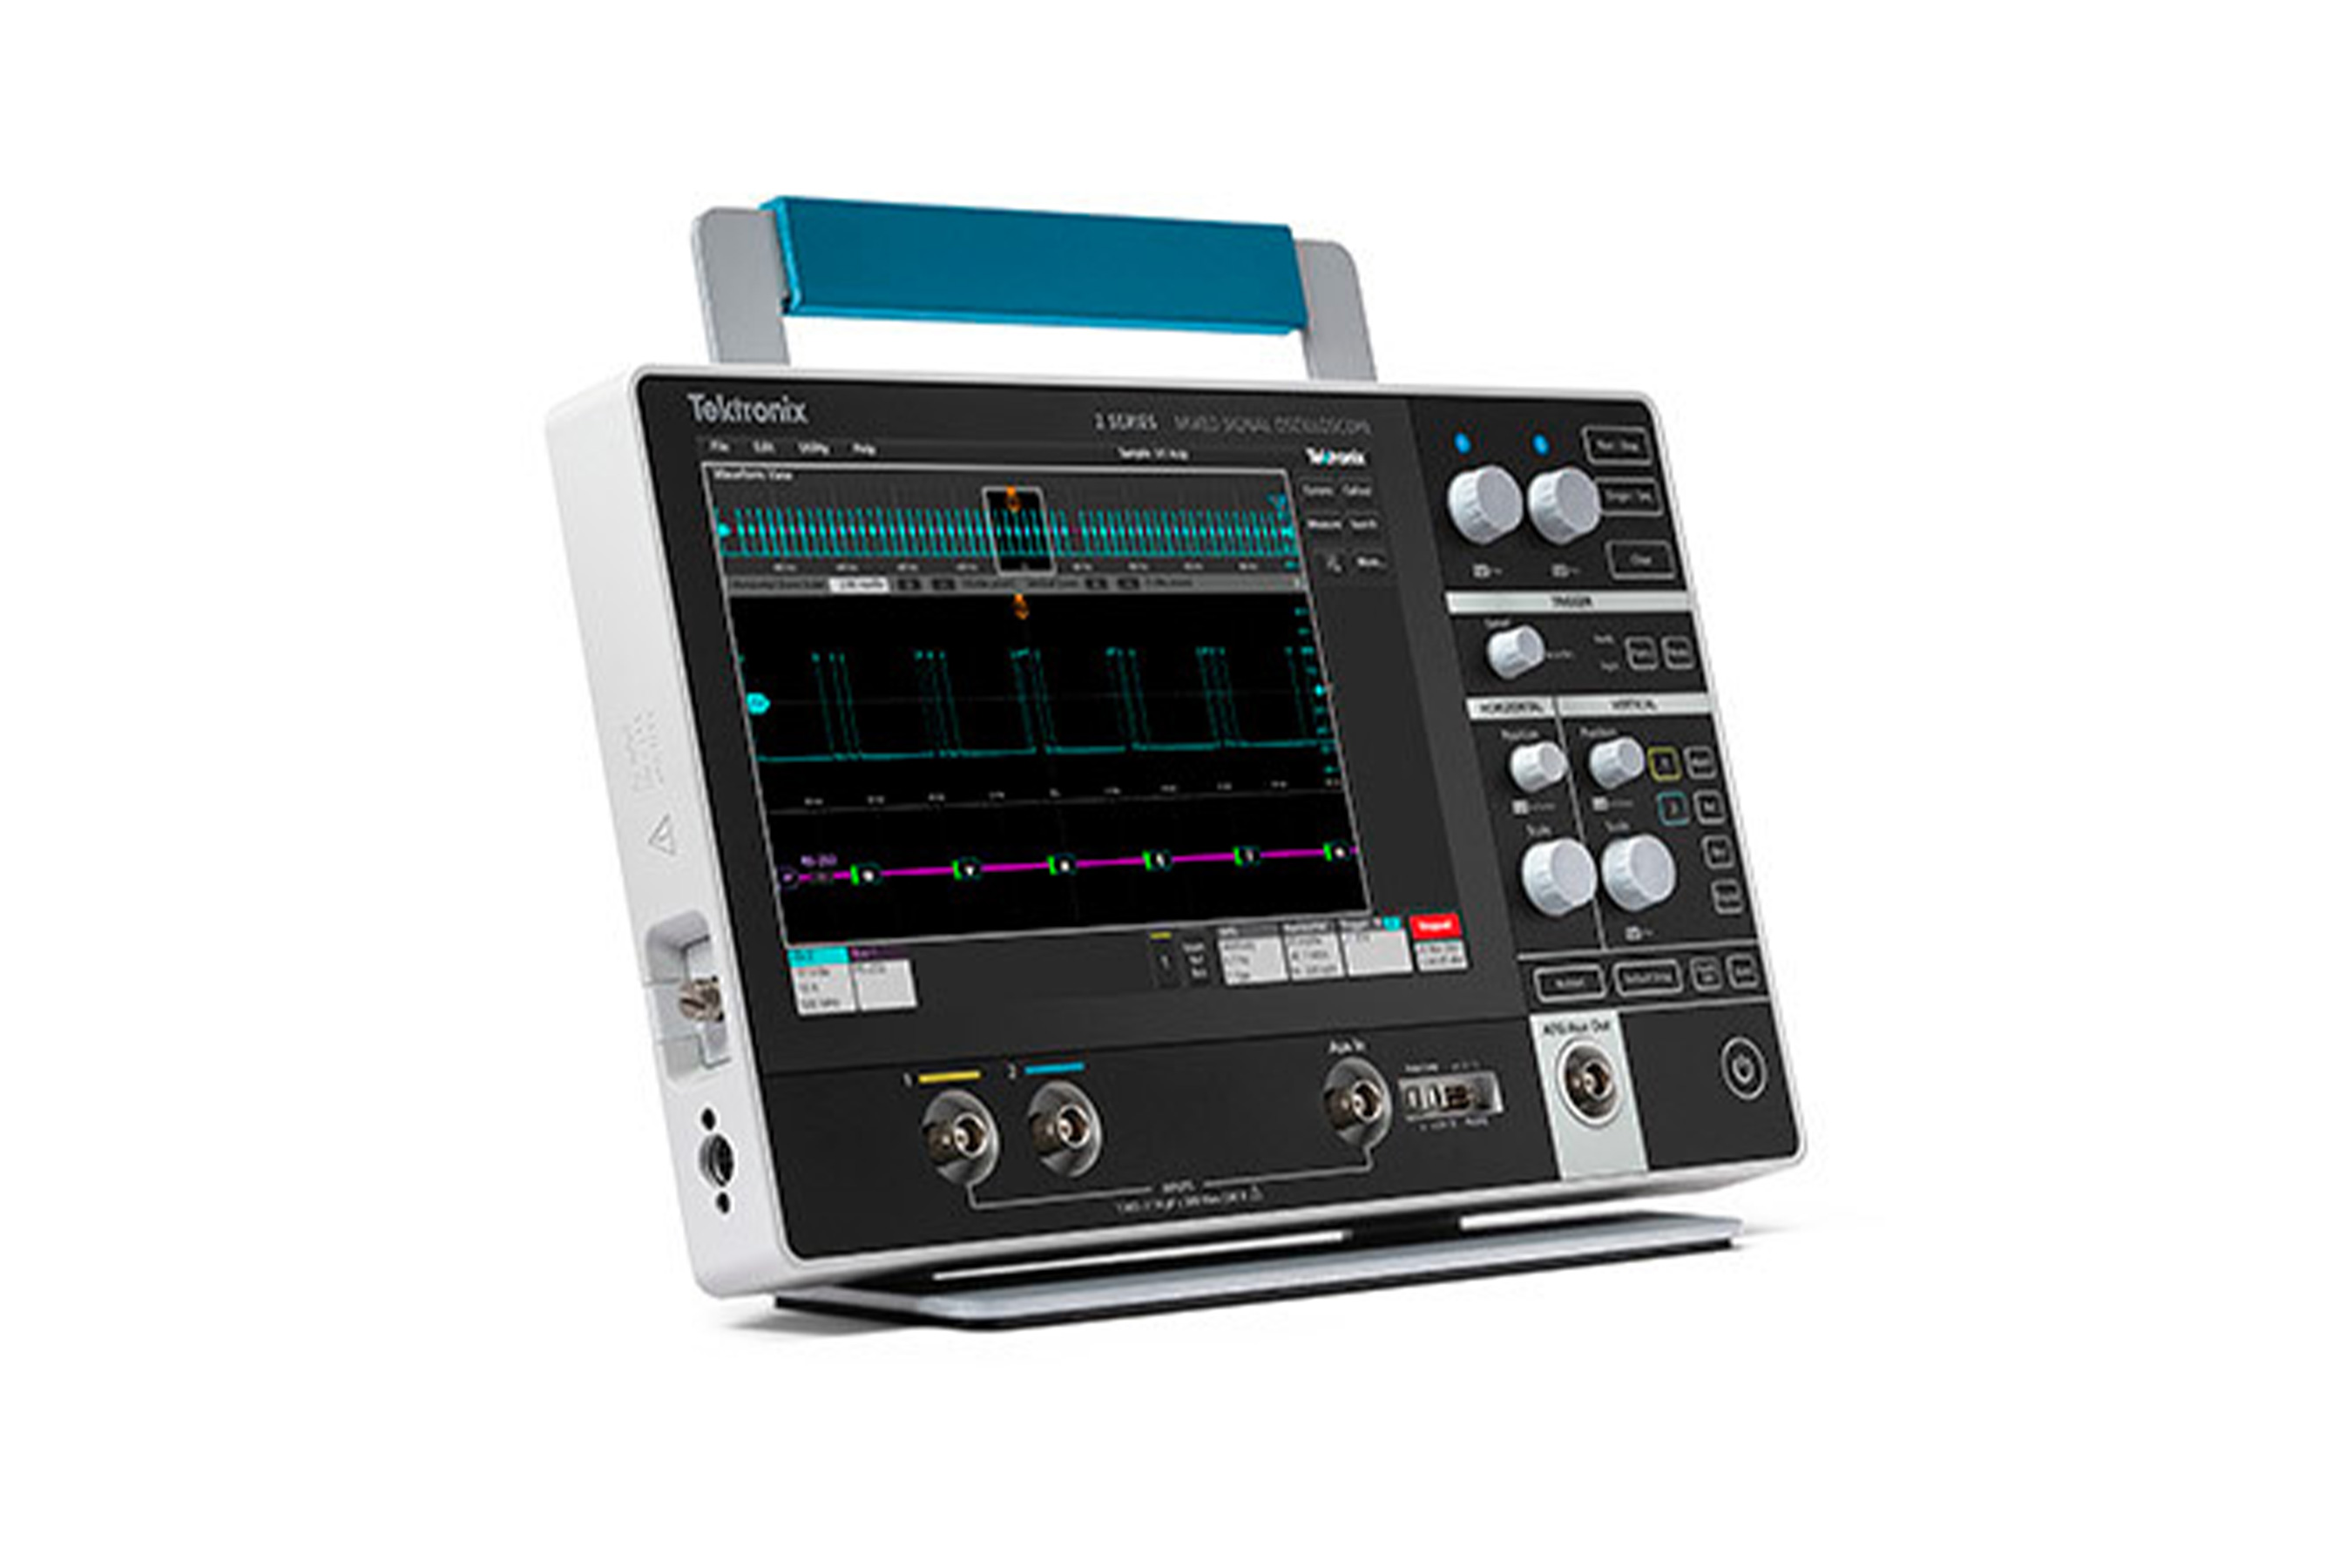 The 2 Series MSO has a modern streamlined appearance with a simplified front panel that contains fewer knobs and buttons to create the most approachable oscilloscope on the market.